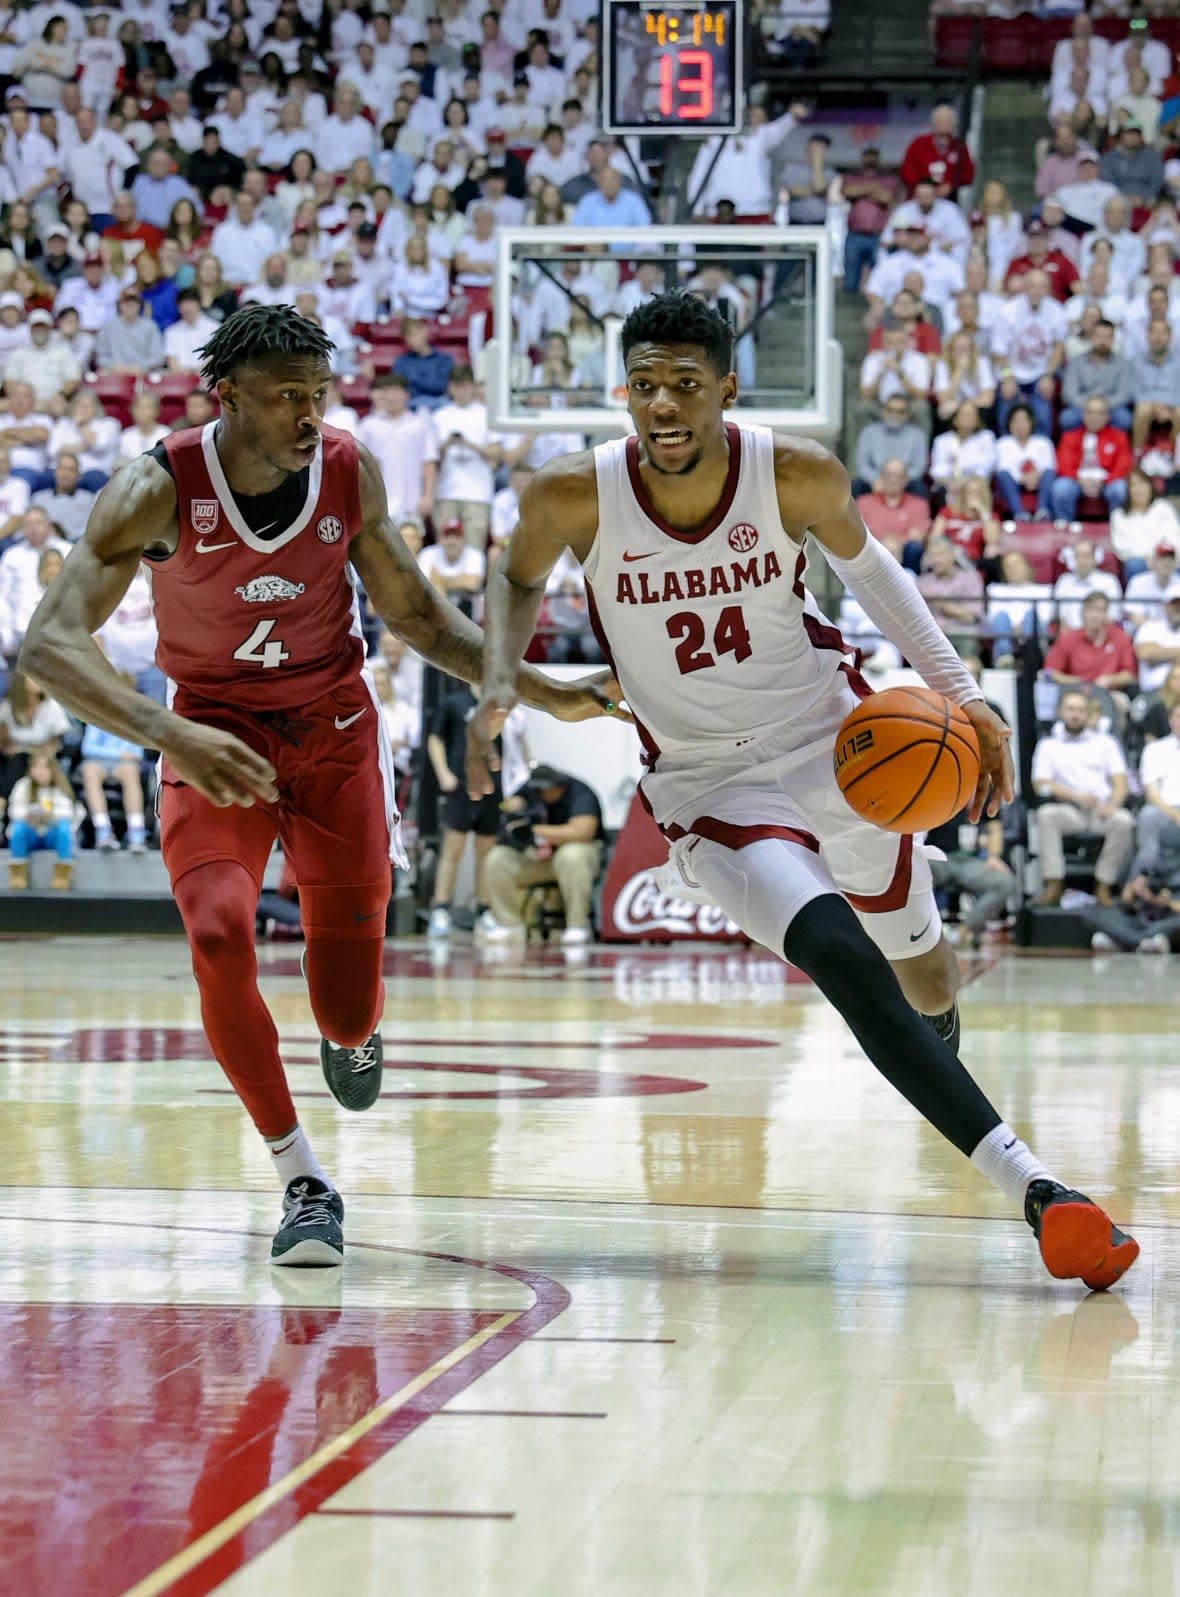 Brandon Miller #24 of the Alabama Crimson Tide drives to the basket against Davonte Davis #4 of the Arkansas Razorbacks during the second half of the game at Coleman Coliseum on February 25, 2023 in Tuscaloosa, Alabama. (Photo by Brandon Sumrall/Getty Images)